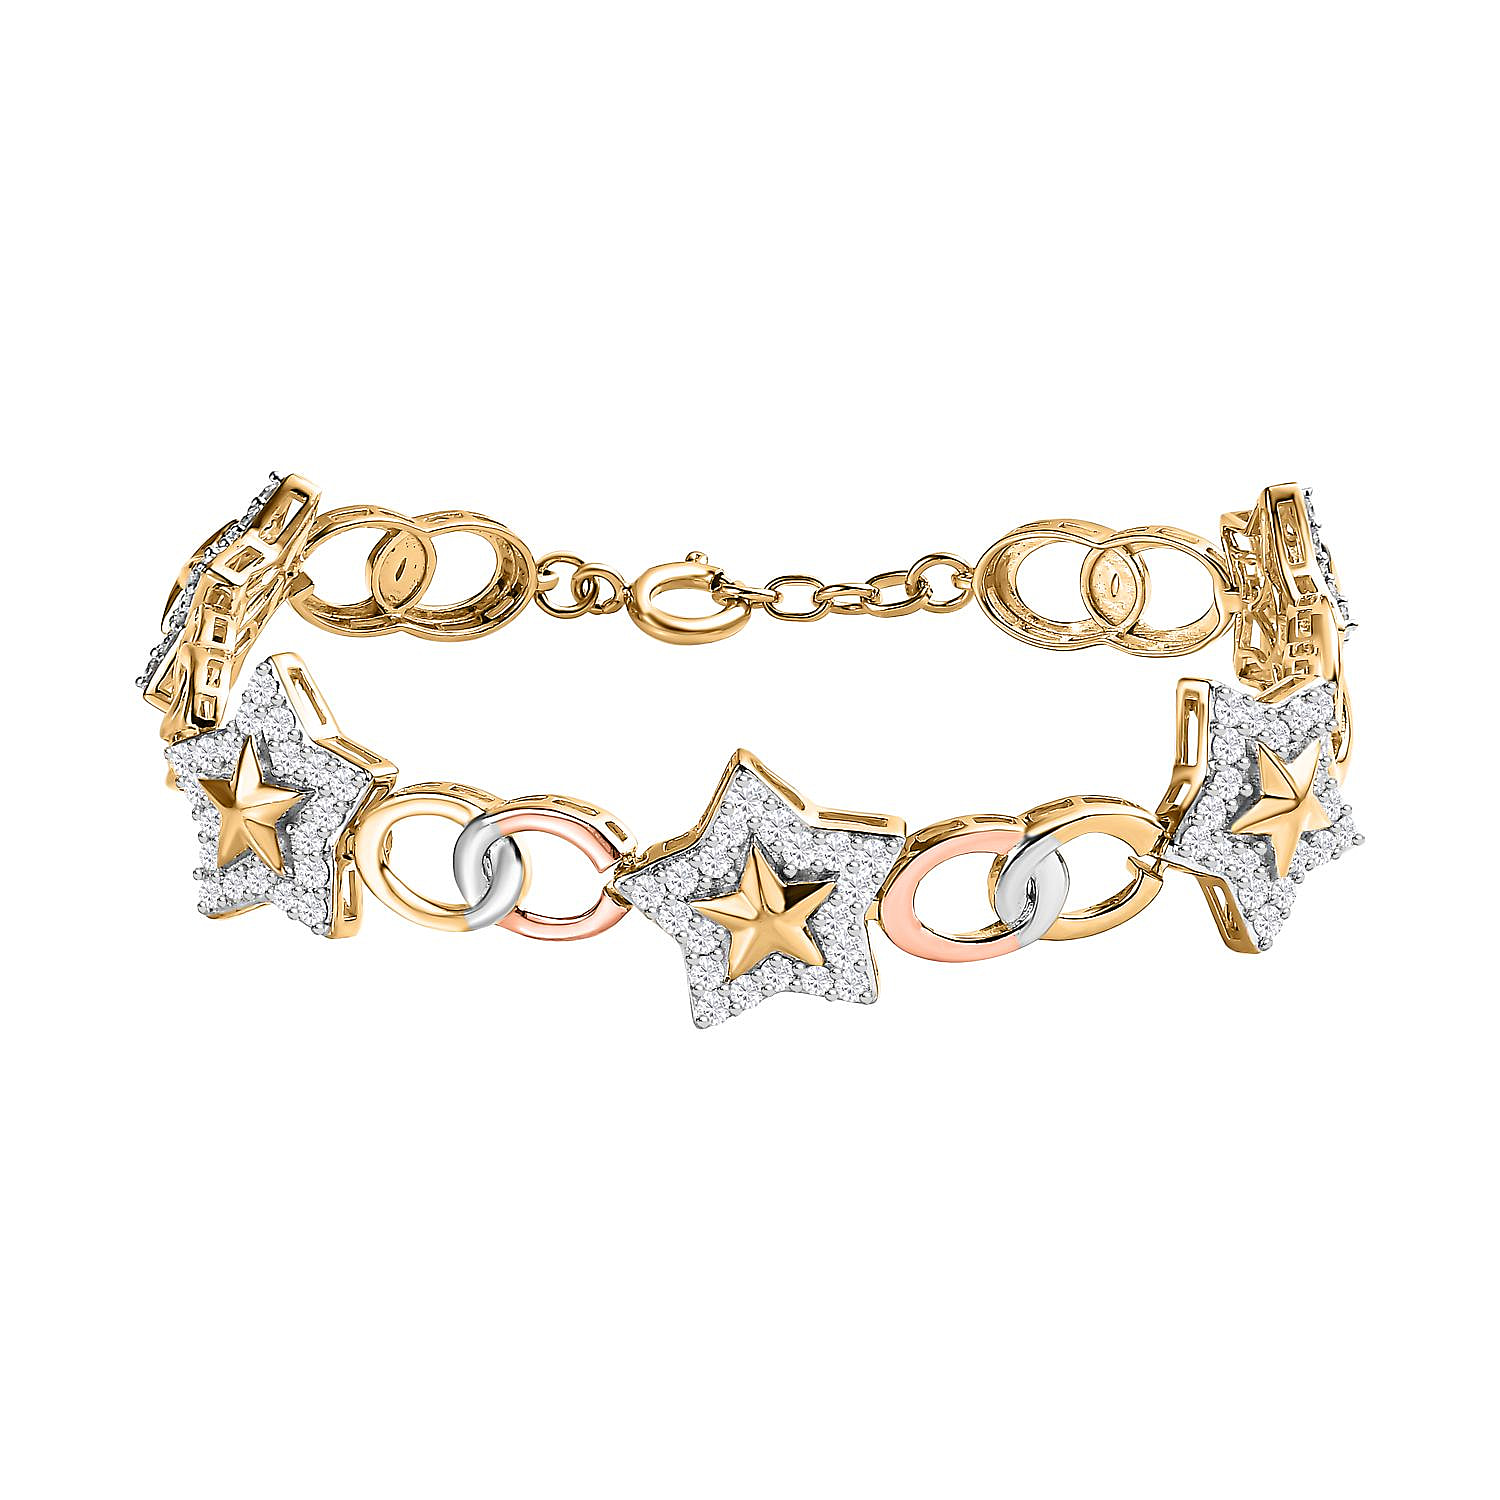 GP Celestial Dream Collection - Moissanite Bracelet (Size - 8) in 18K Yellow, Rose Gold Vermeil & Platinum Plated Sterling Silver 3.13 Ct, Silver Wt. 18.05 Gms